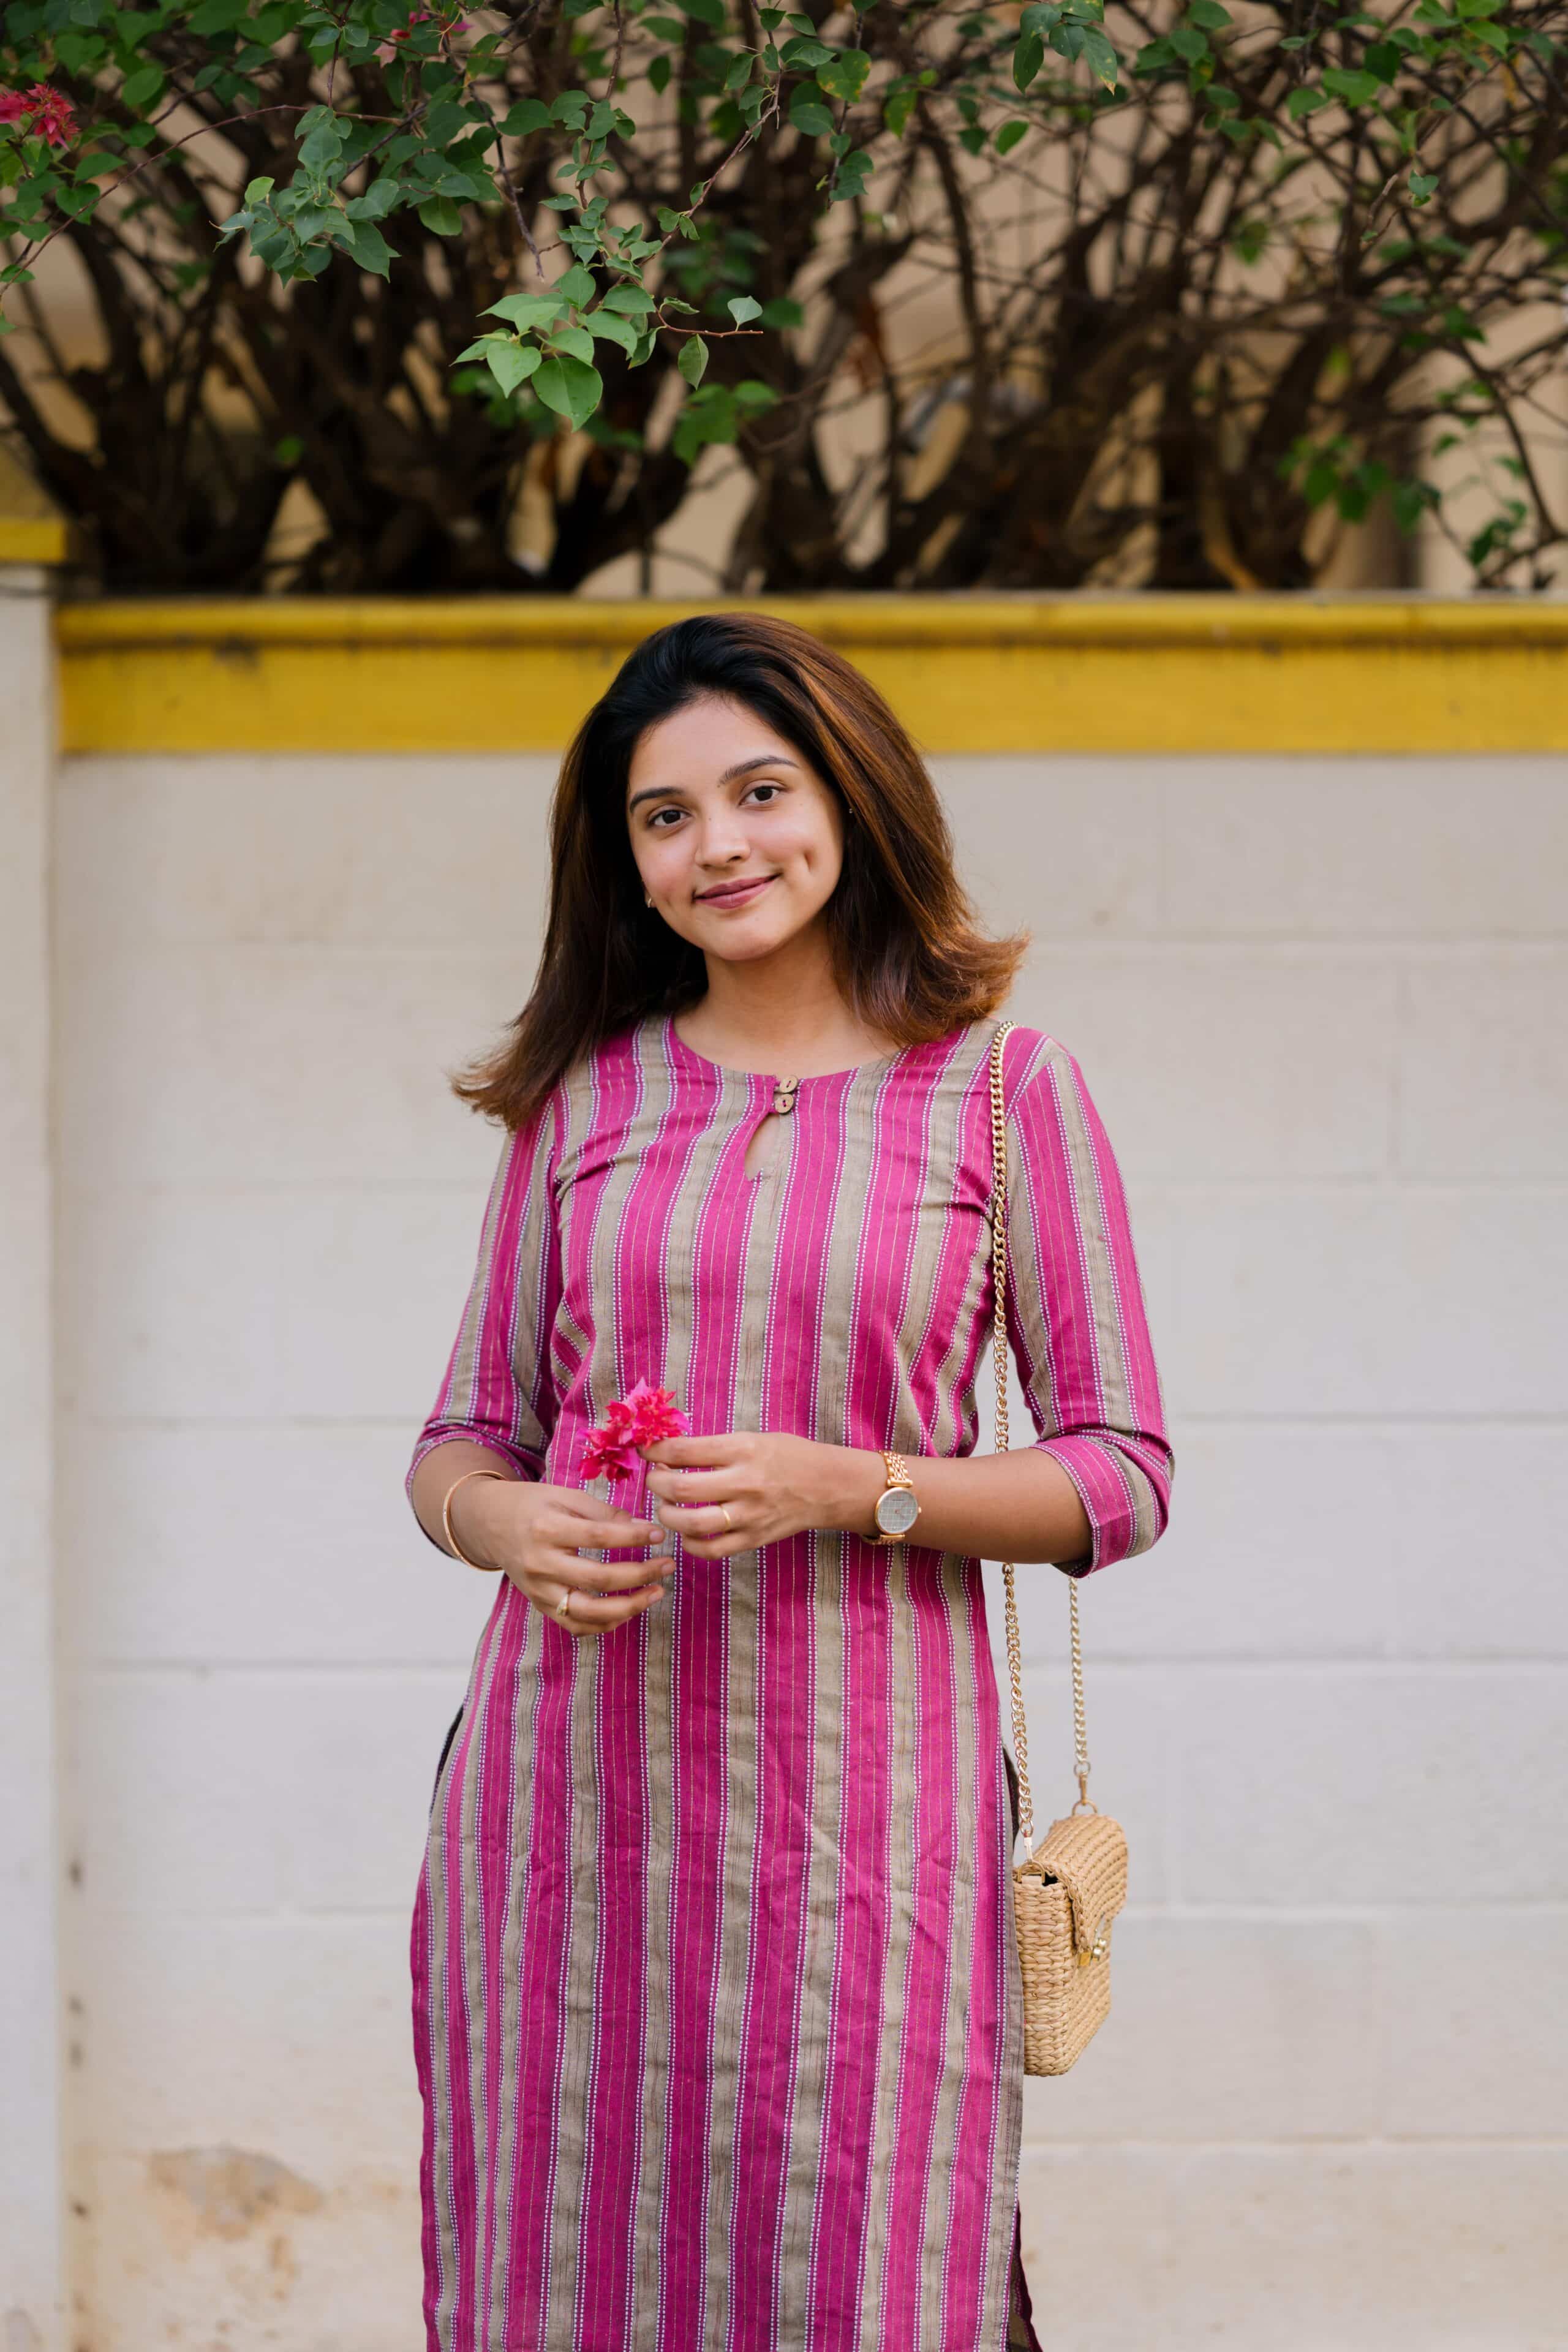 Budget Buys #11 - Cotton blend handwoven kurta set in magenta and ivory